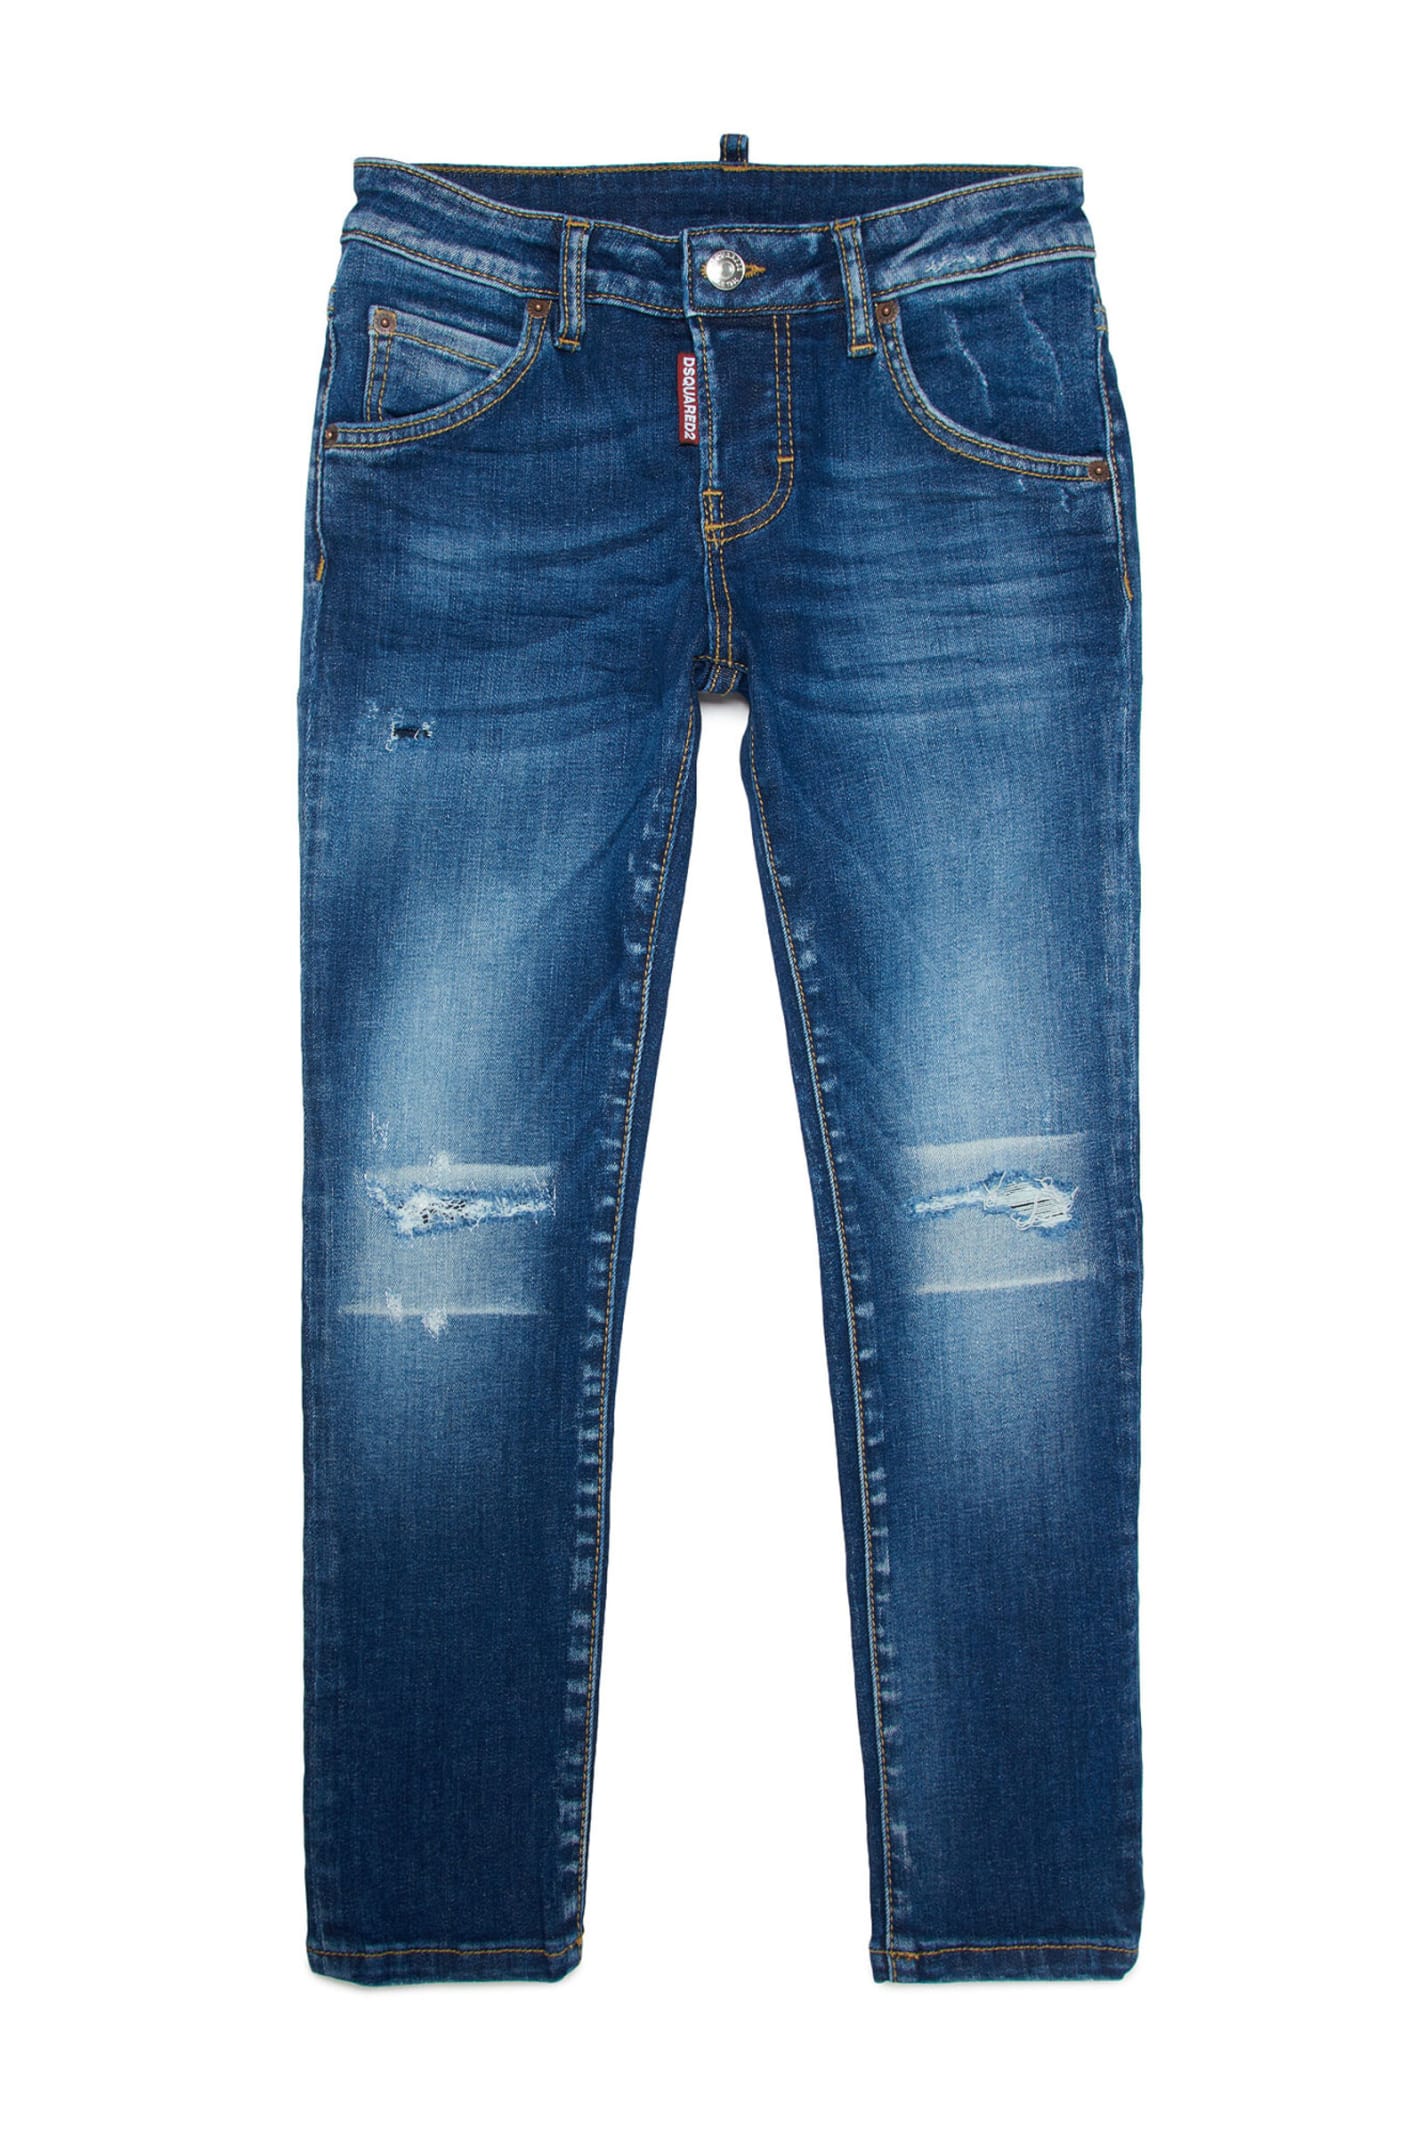 Dsquared2 D2p43lvf Cool Girl Jean Trousers Dsquared Jeans Cool Guy Skinny Dark Blue Washed With Rips